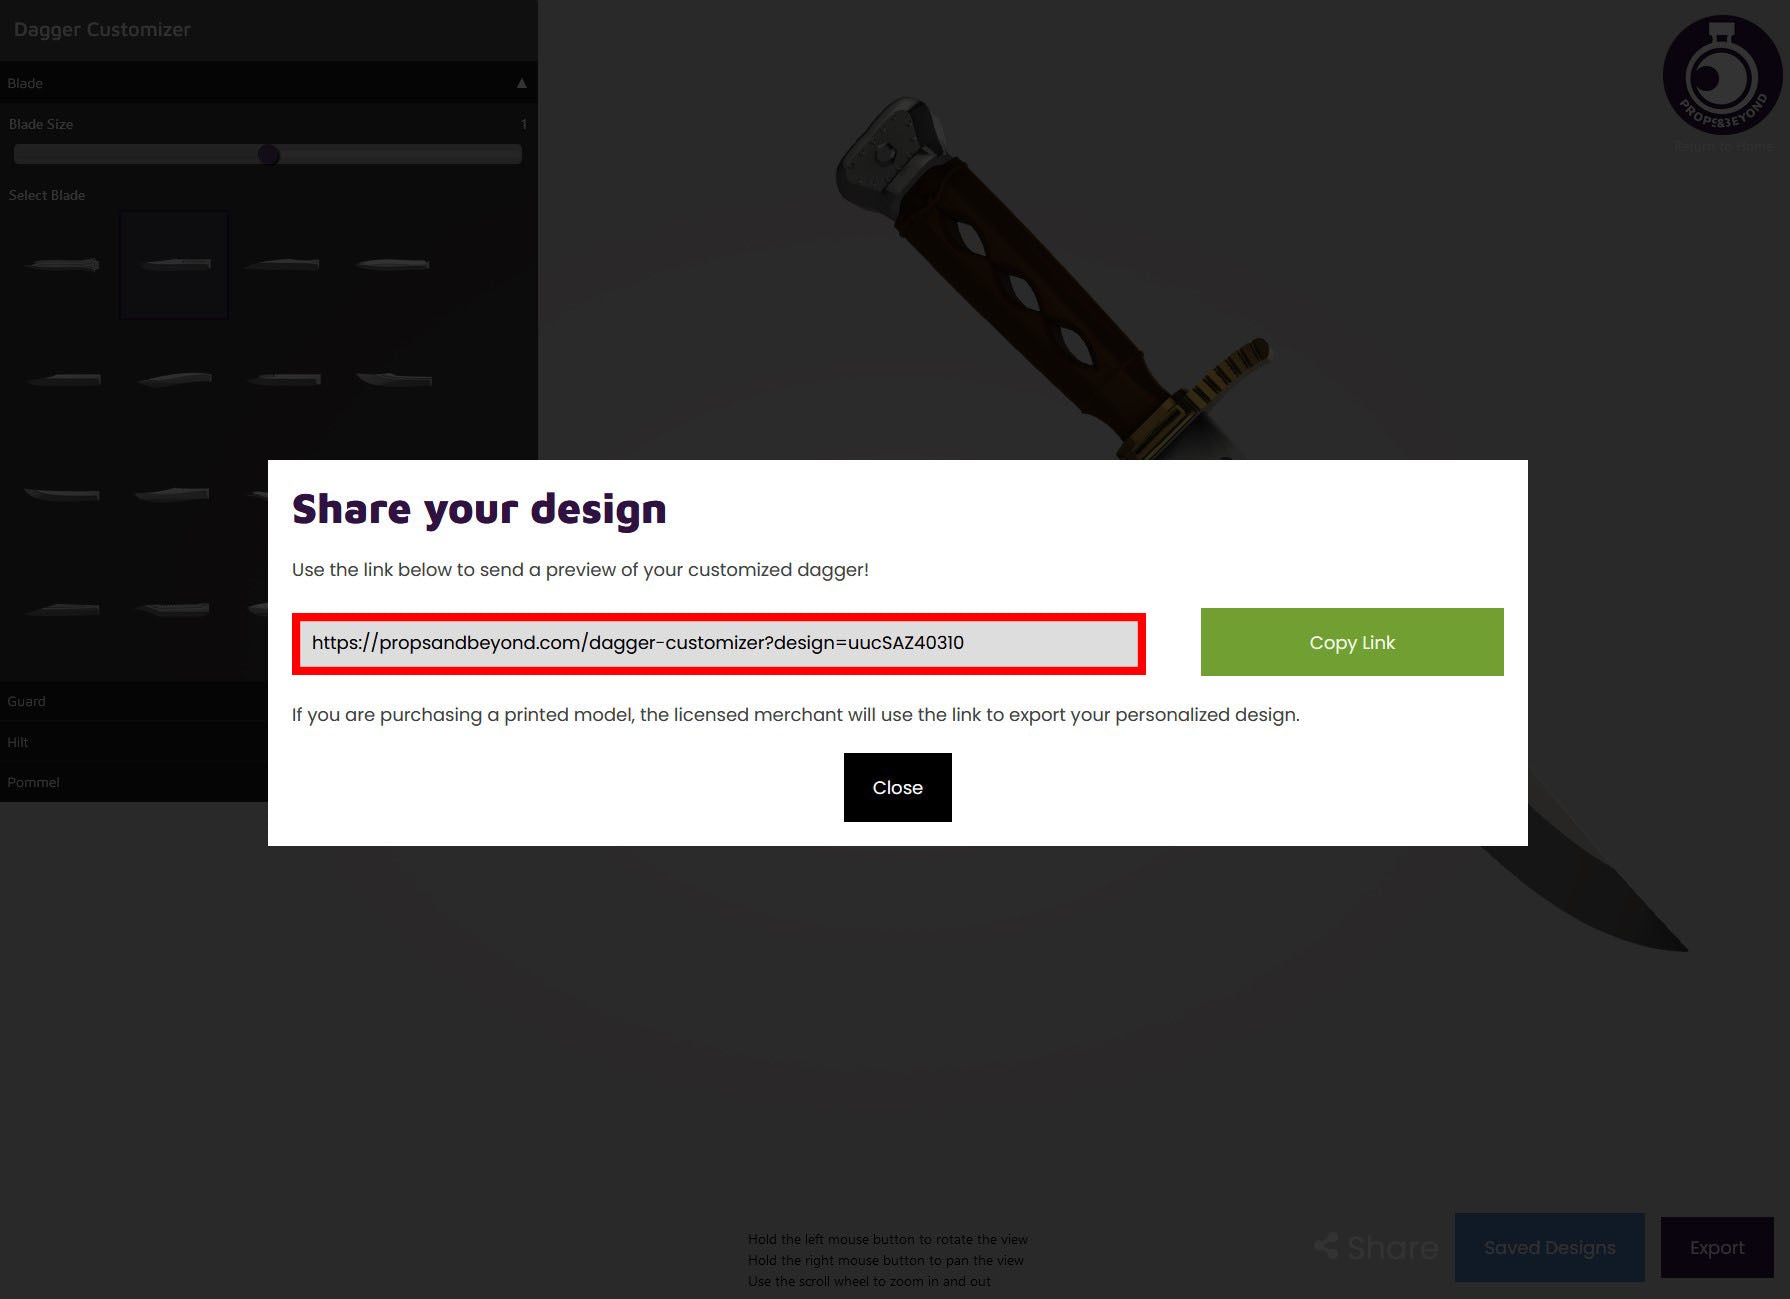 Dagger Customizer by Props & Beyond, Share your design link highlighted